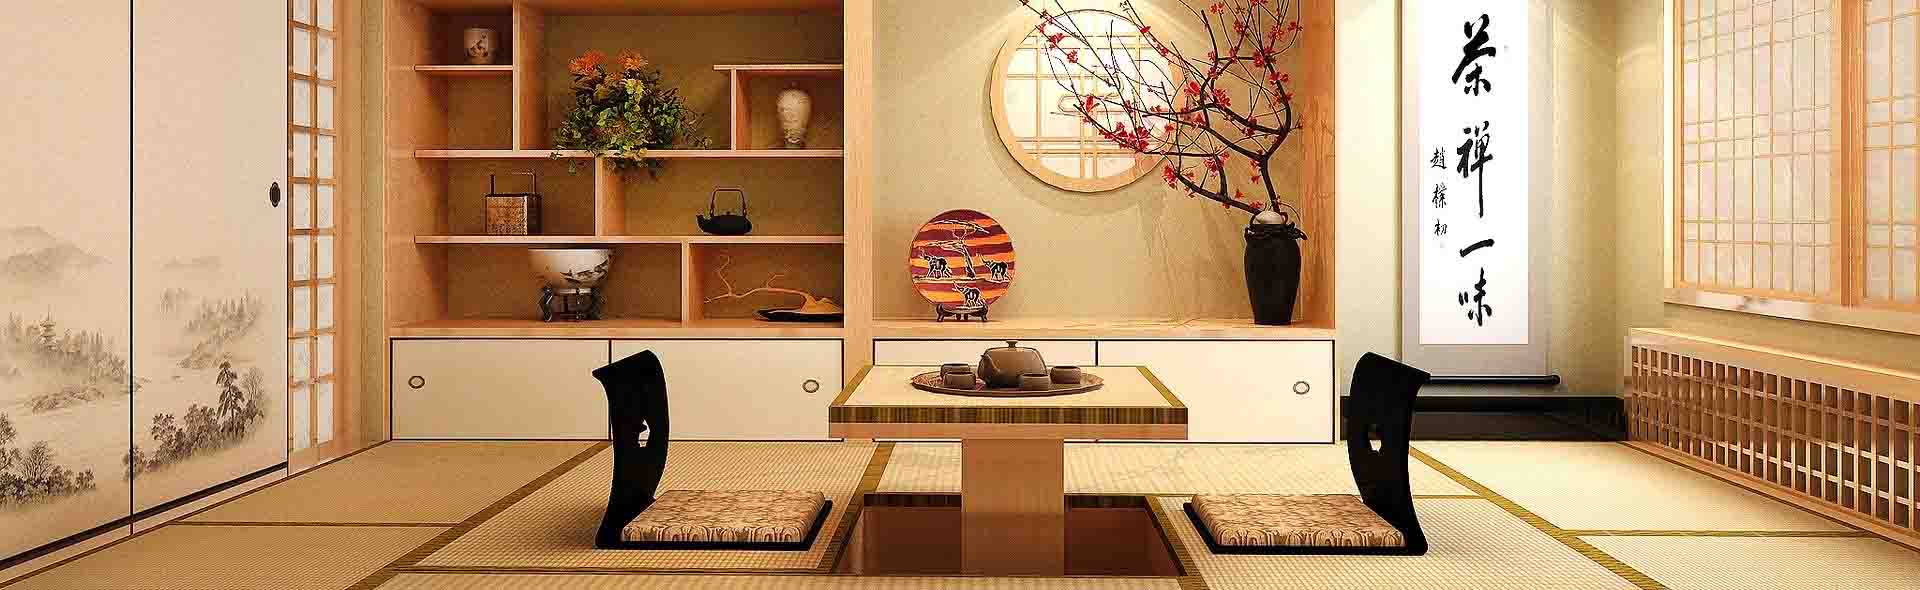 japanese culture event home